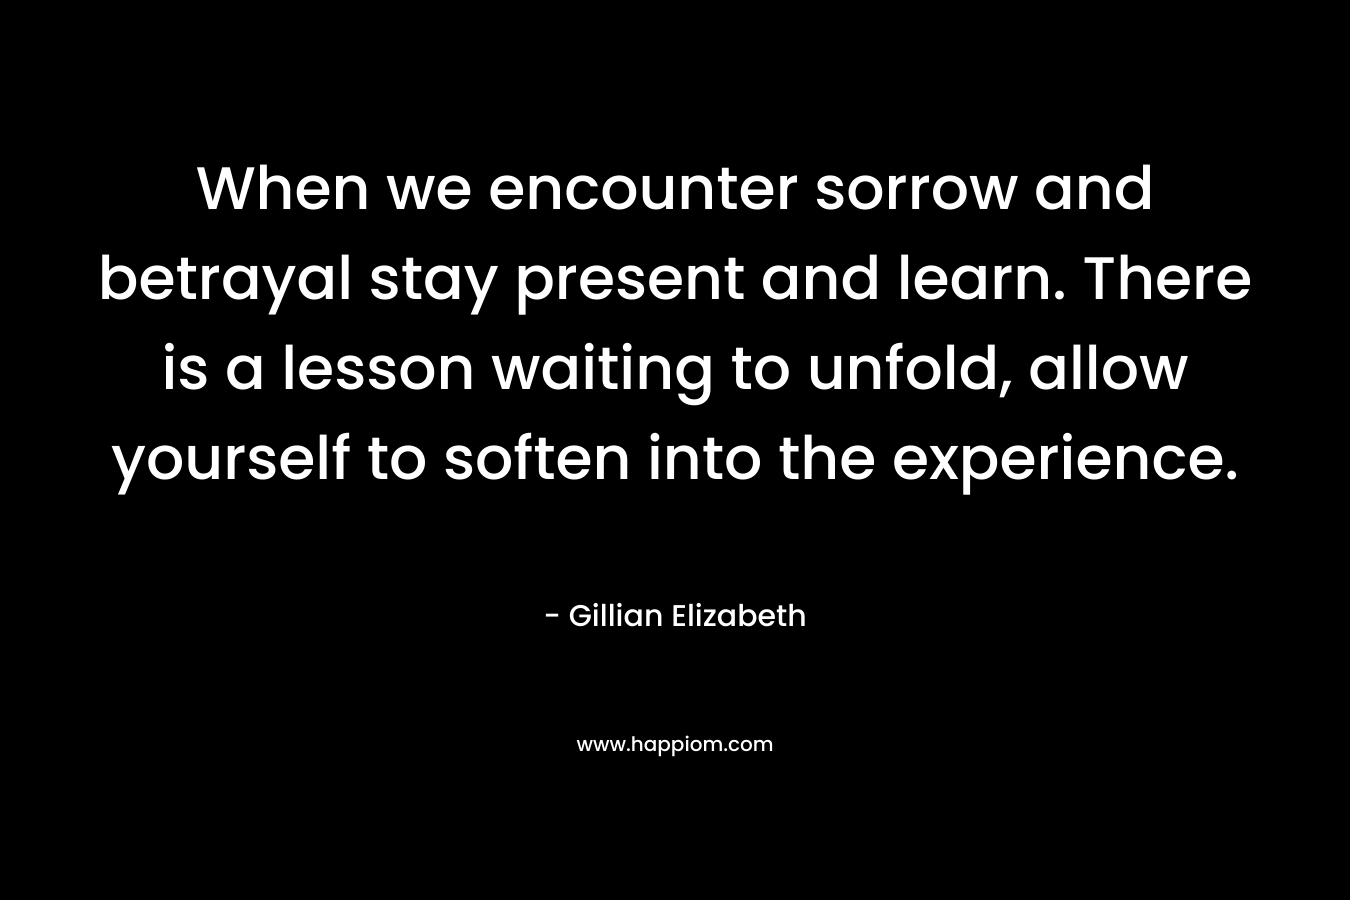 When we encounter sorrow and betrayal stay present and learn. There is a lesson waiting to unfold, allow yourself to soften into the experience. – Gillian Elizabeth